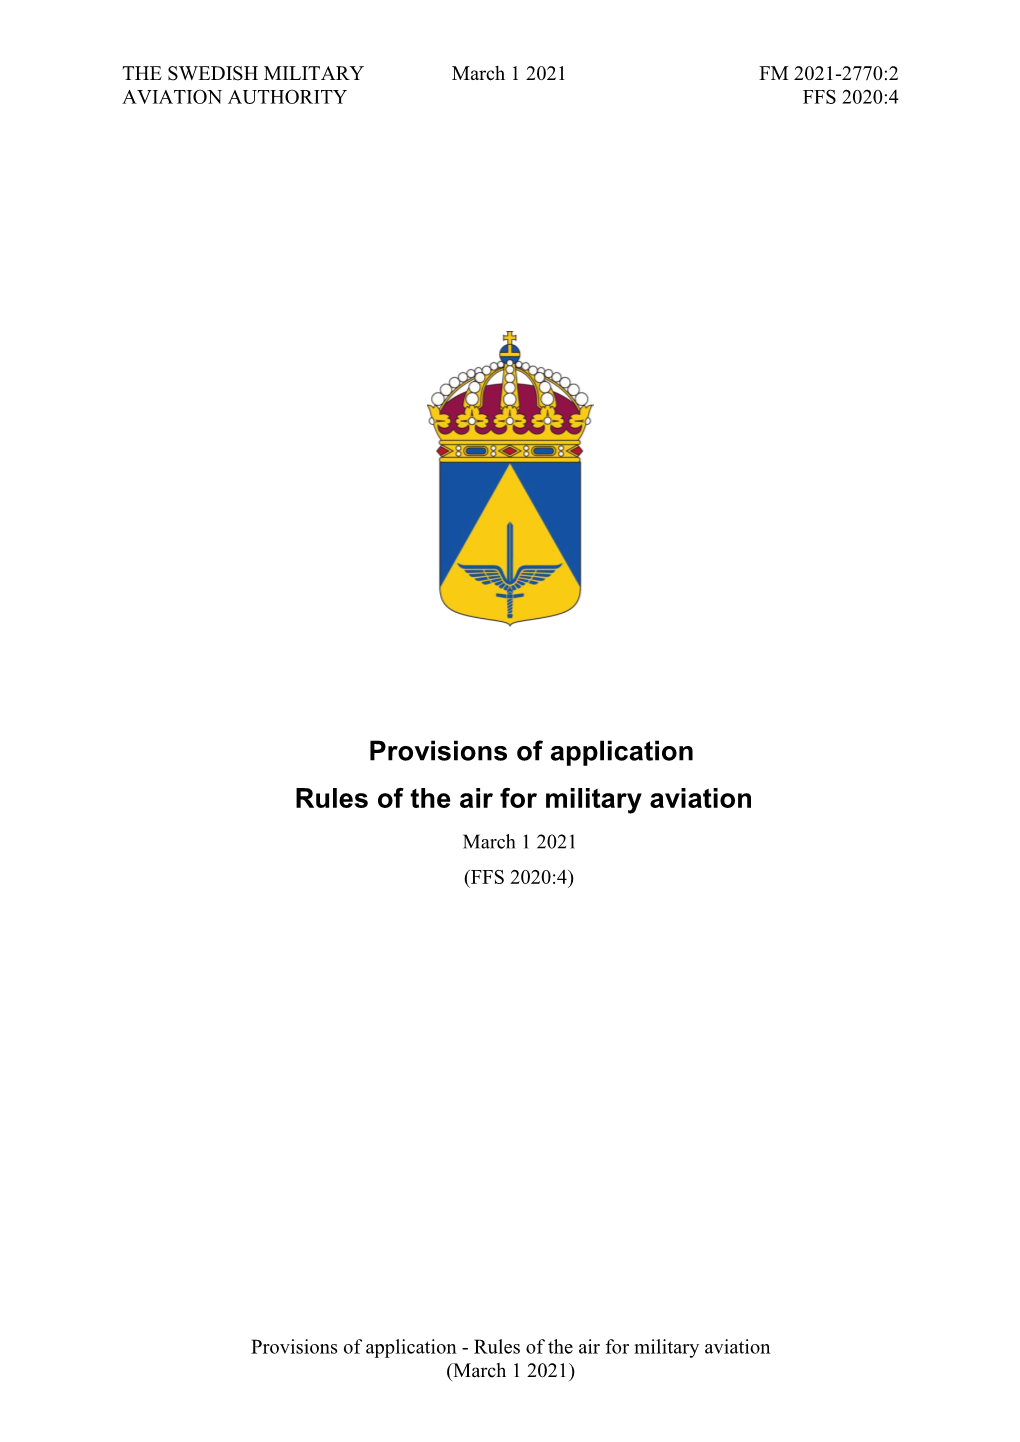 Provisions of Application Rules of the Air for Military Aviation